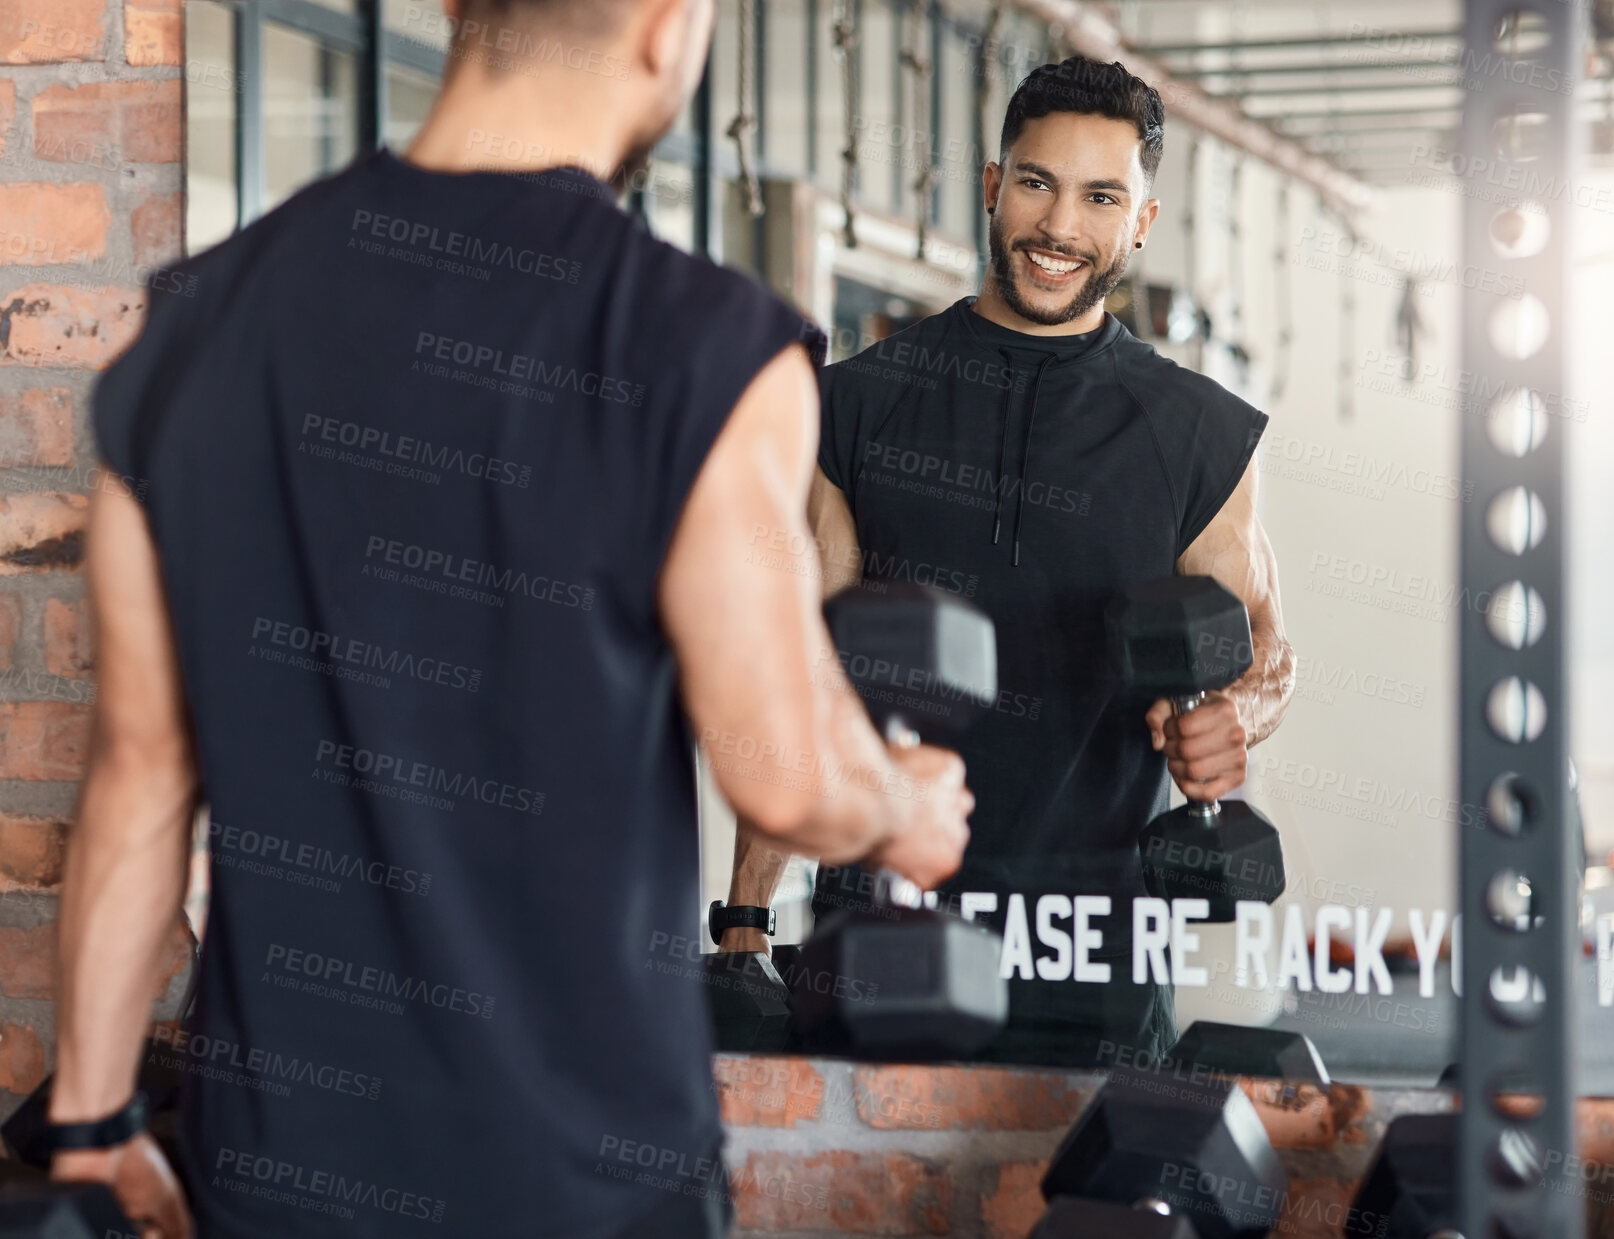 Buy stock photo Shot of a sporty young man looking at himself in a mirror while exercising with dumbbells in a gym